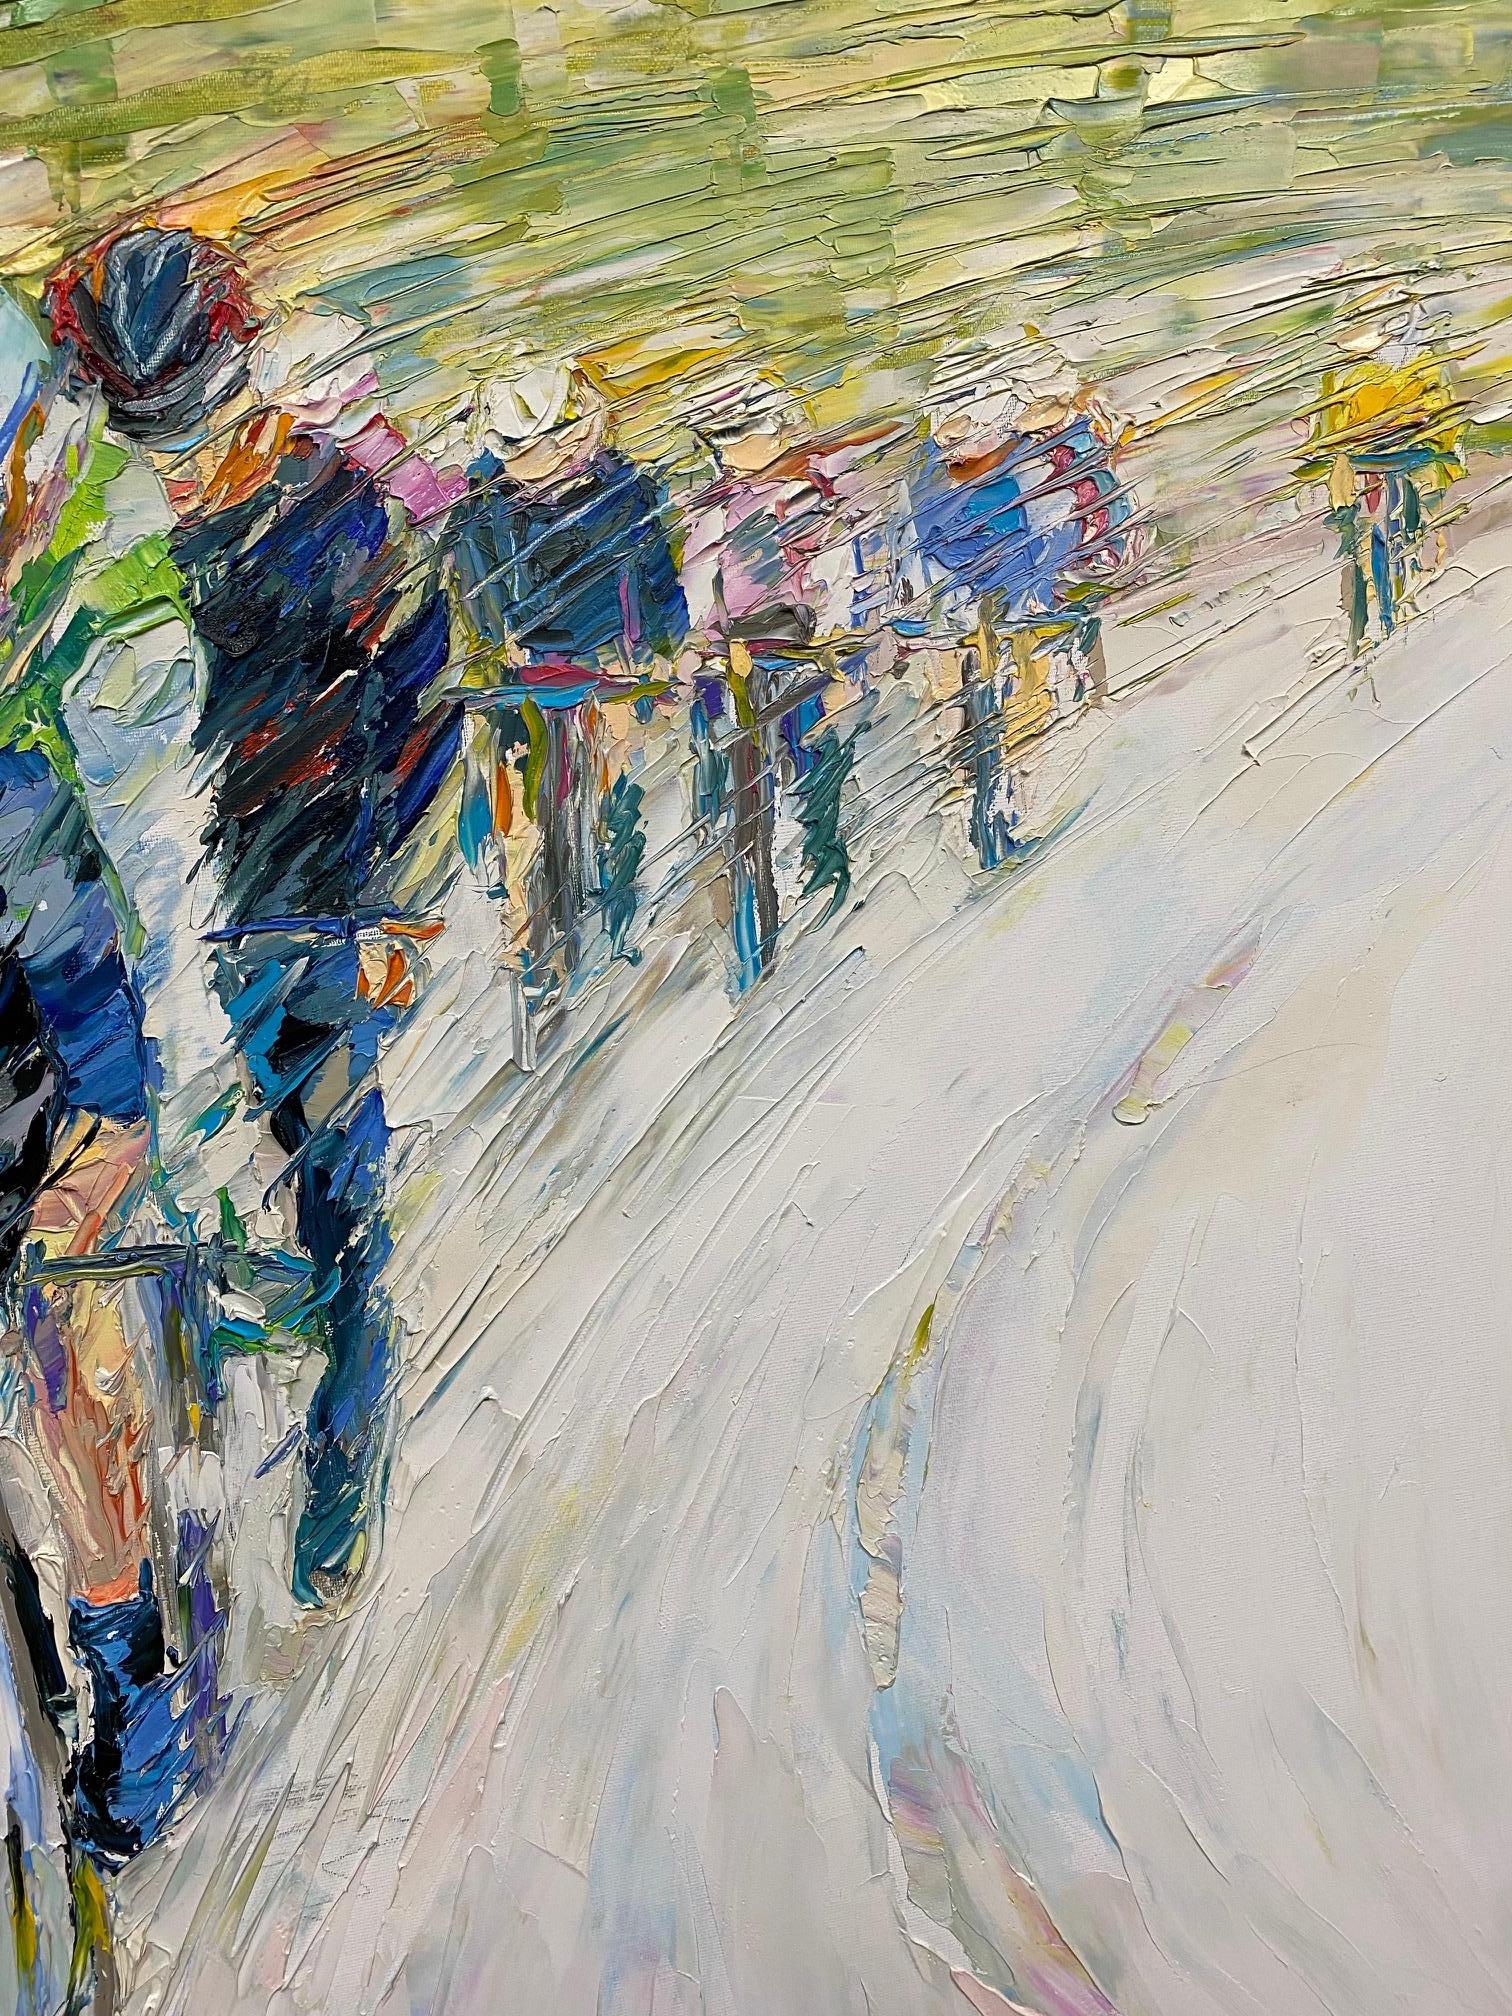 Lithuanian born artist Serge Ovcaruk has used his palette knife to create a figurative sporting landscape that layers the many secrets, hopes and heartaches of the most revered cyclists on the globe.  His heavy impasto paint application knows no